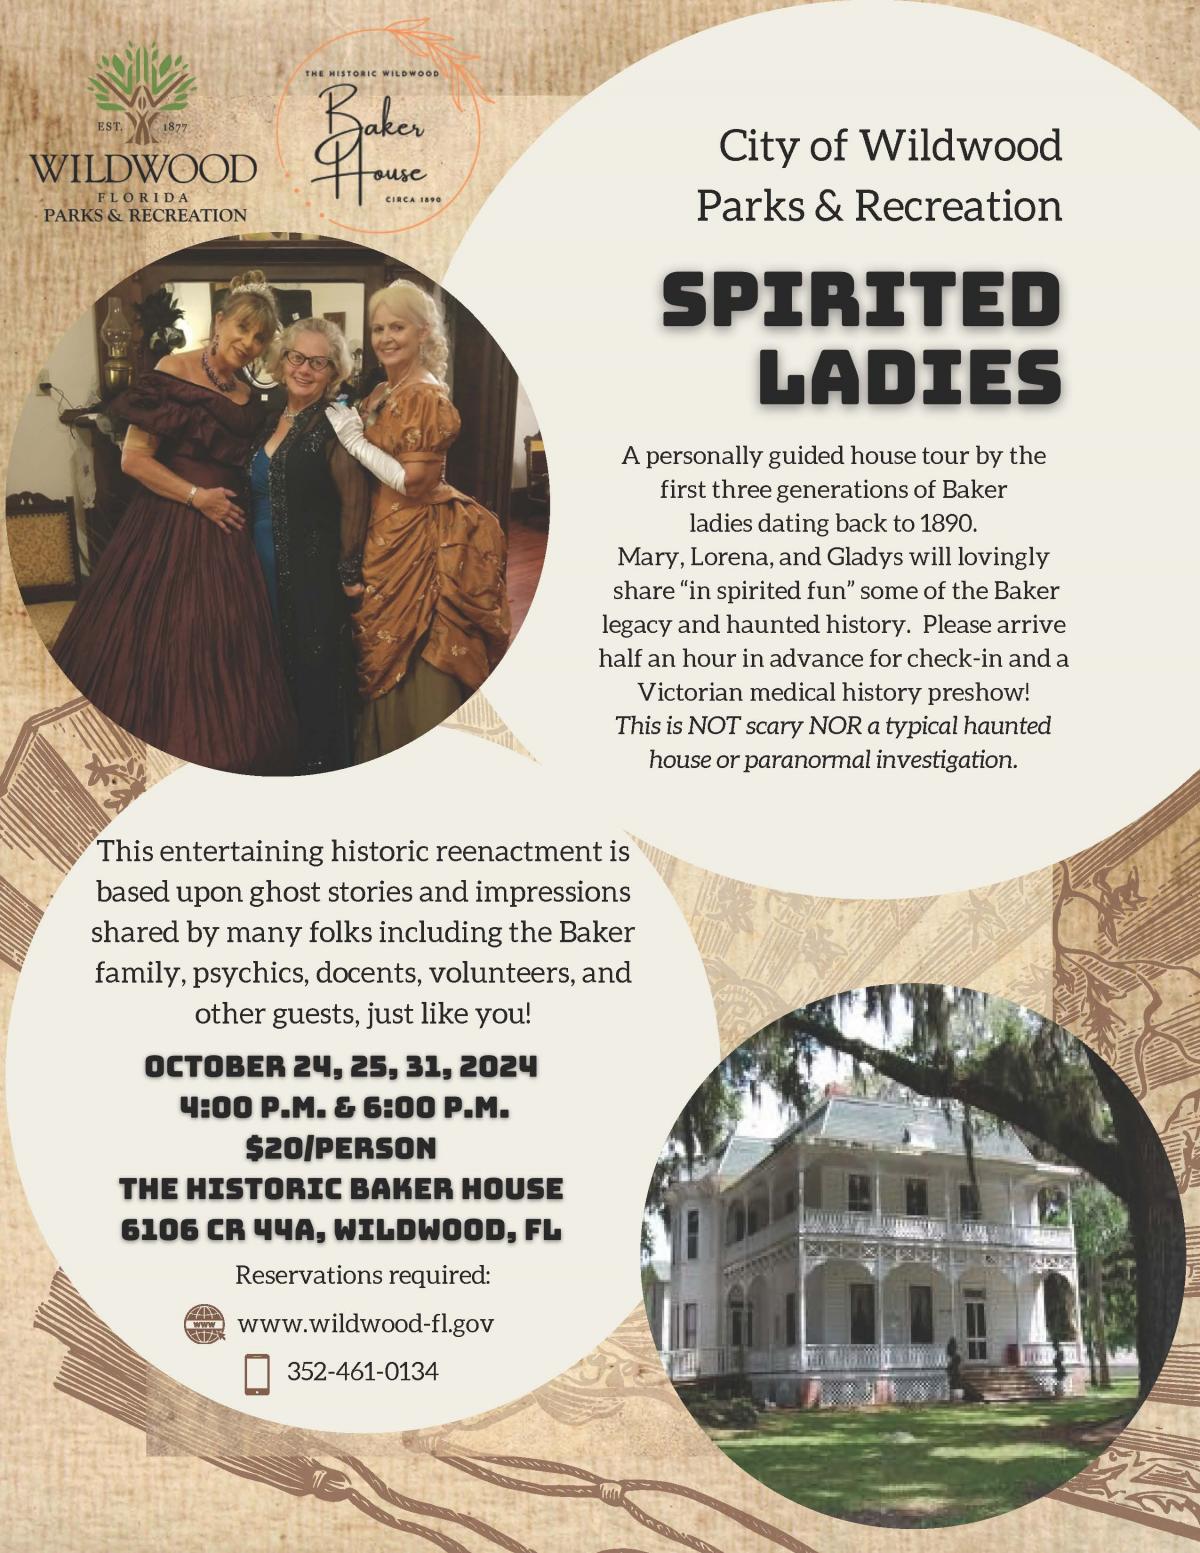 Spirited Ladies Tour, October 24, 25, 31, 2024, Baker House, 6106 CR 44A, Wildwood Fl, 34785, 4:00 p.m. and 6:00 p.m.